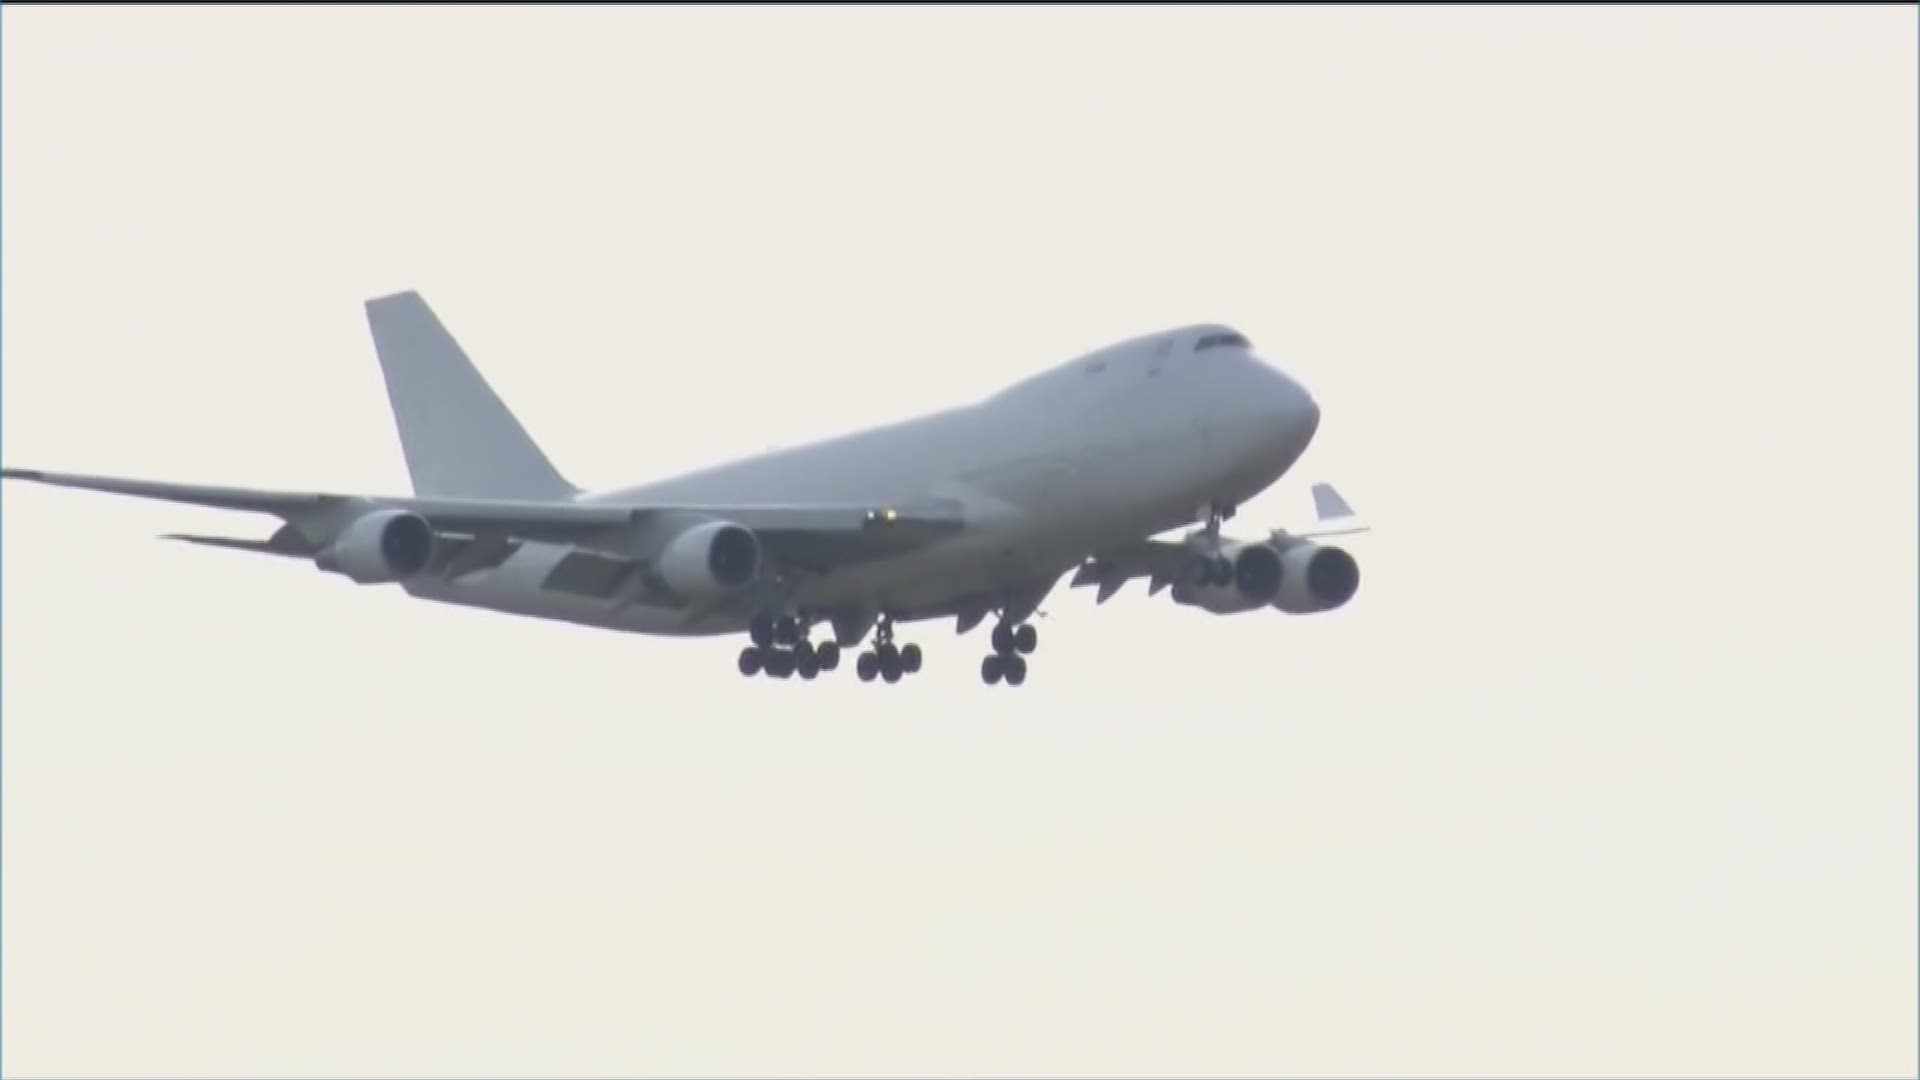 A plane carrying American evacuees from the Wuhan region of China arrived at Marine Corps Air Station Miramar Wednesday morning.